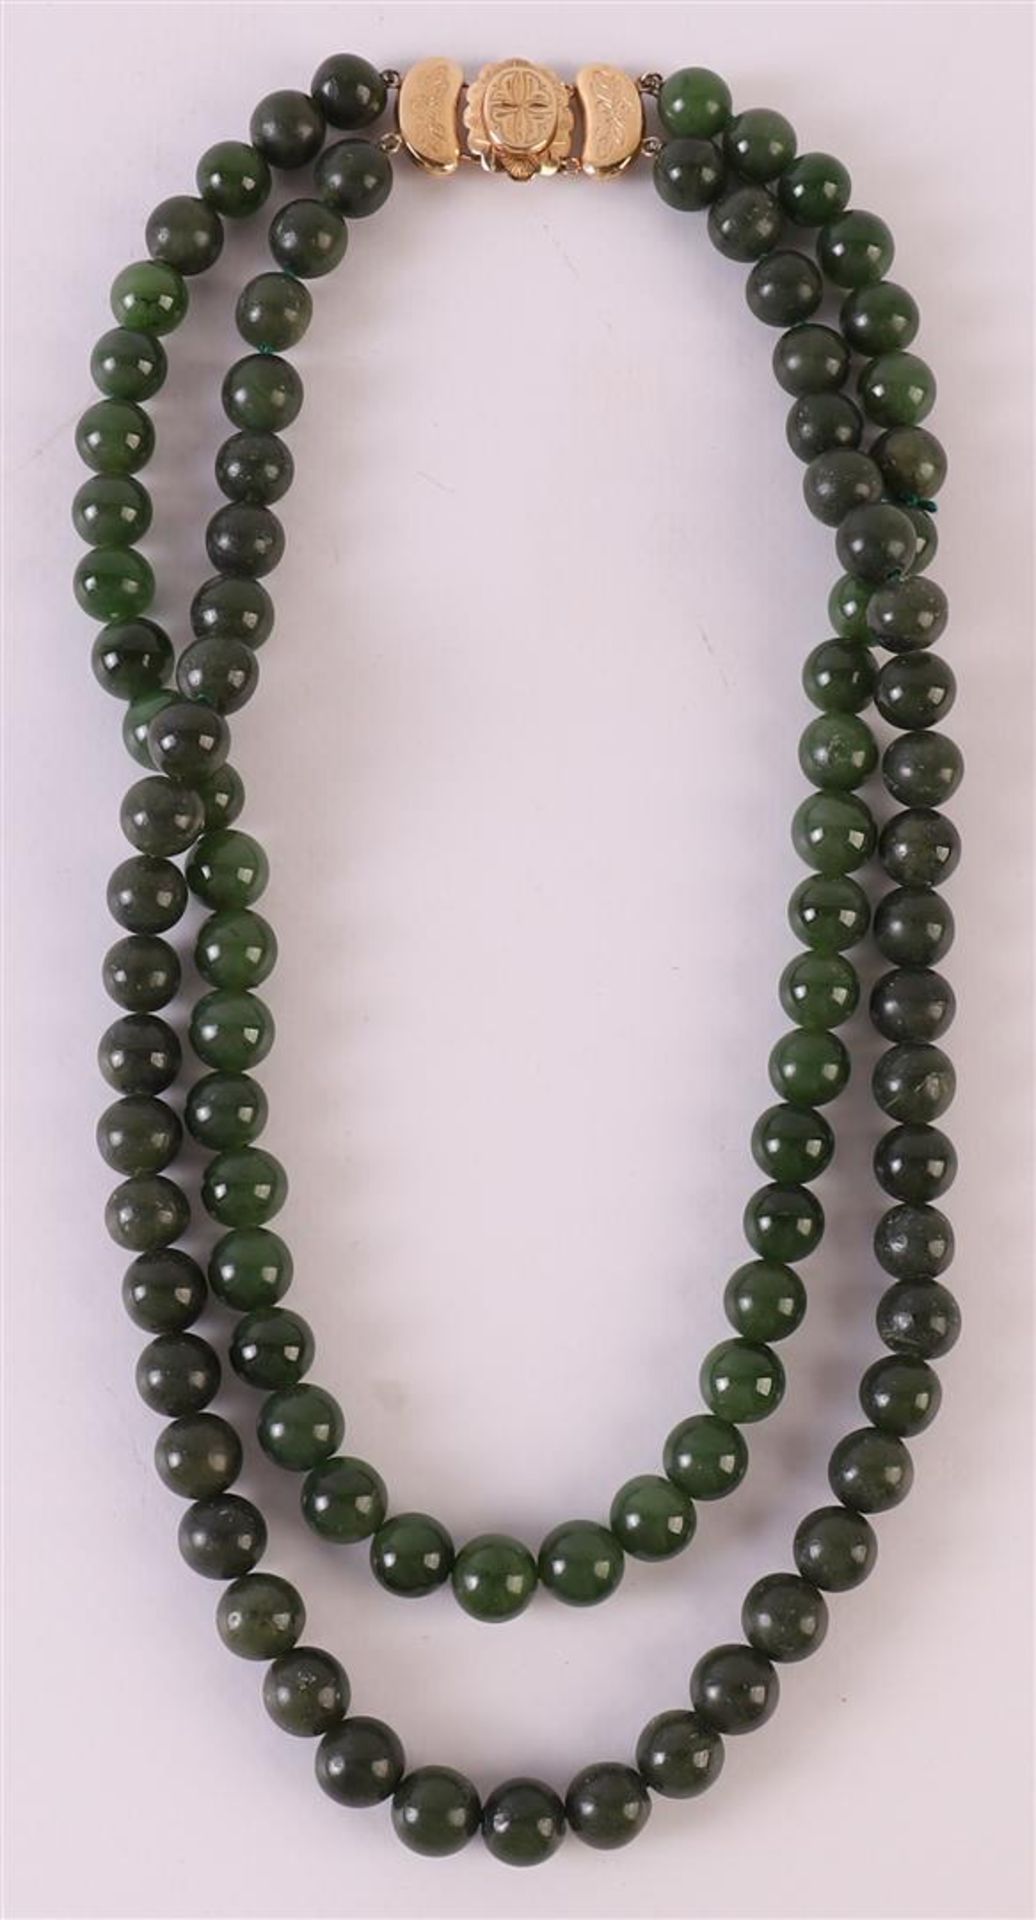 A 2-row necklace of aventurine beads, approximately 10mm thick with a 14 carat 585/1000 gold hook